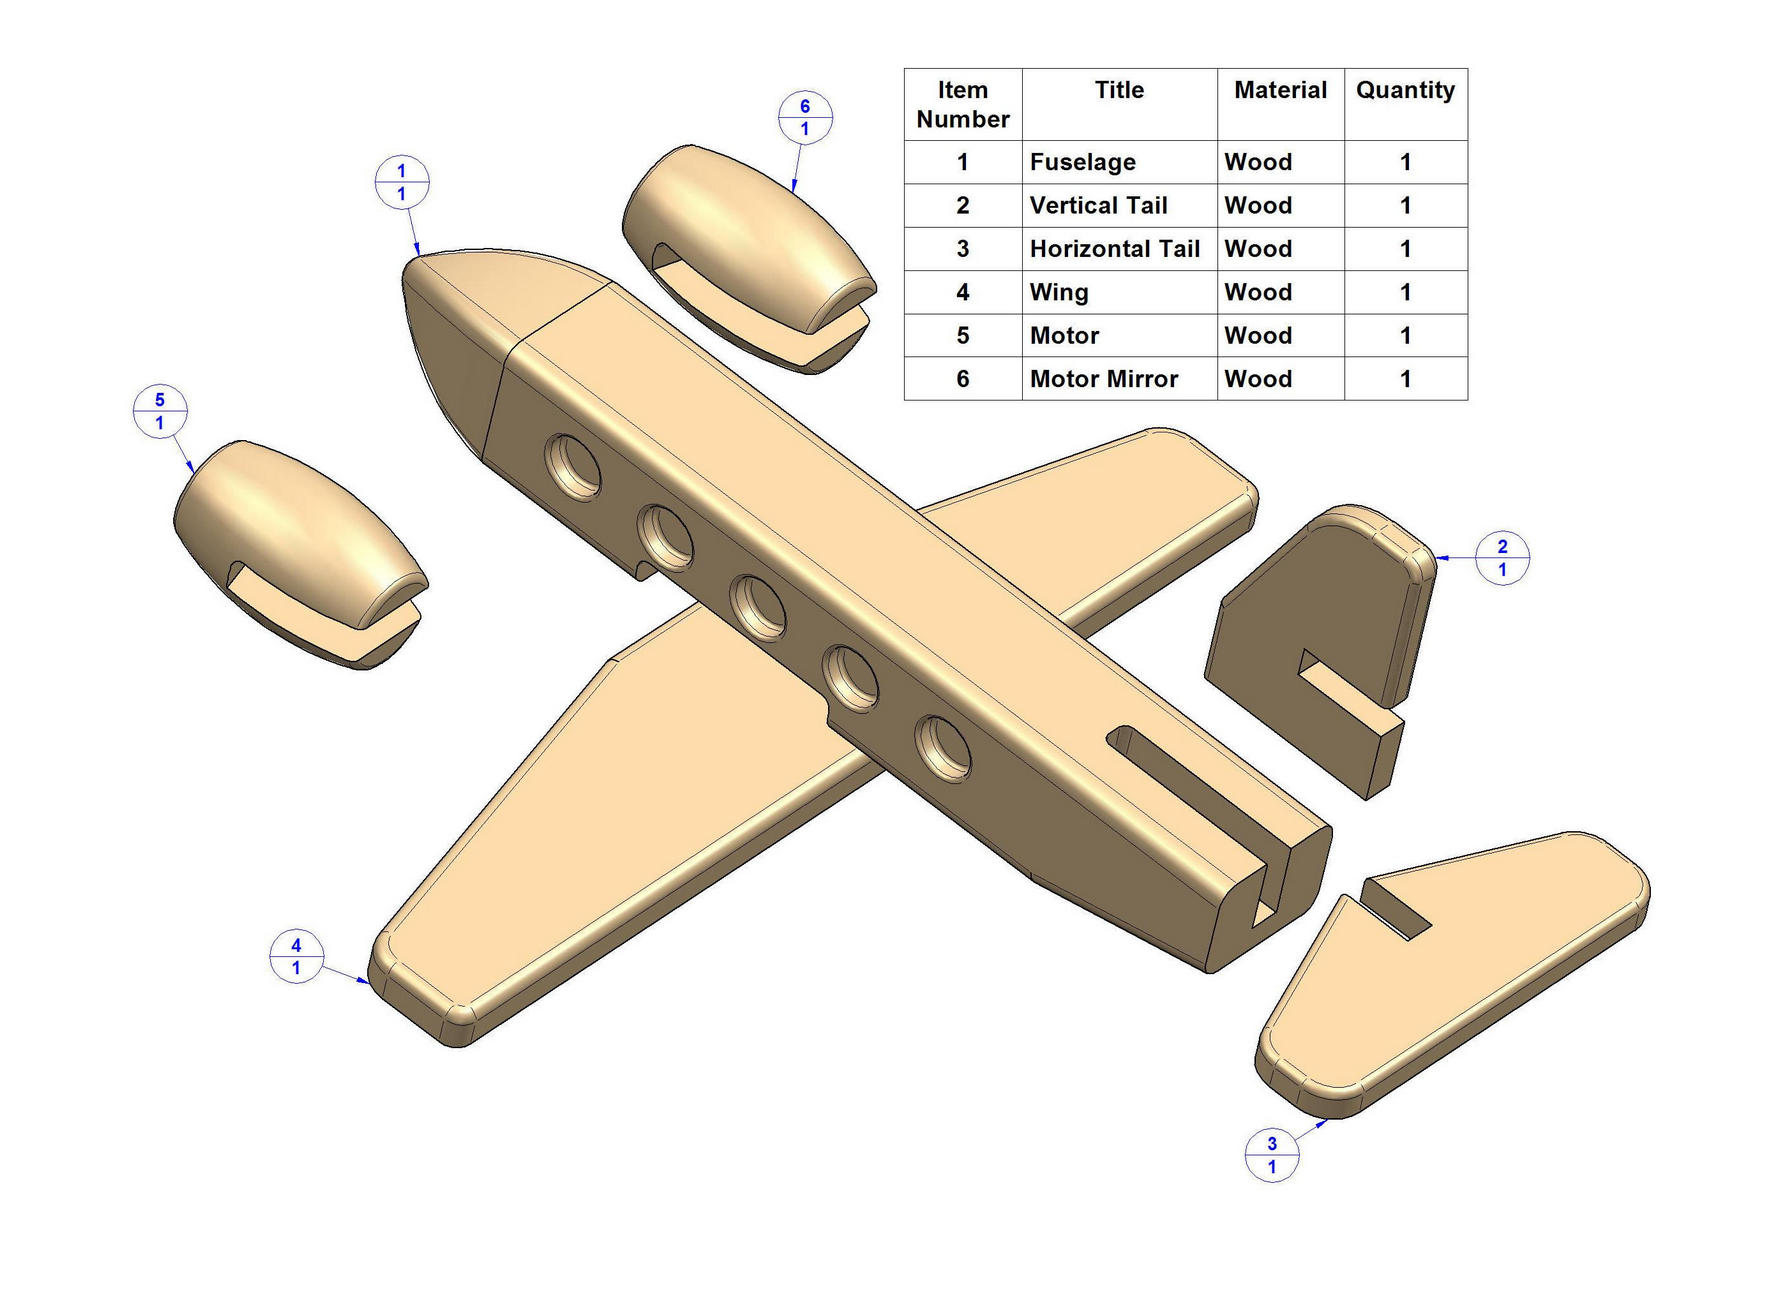  wooden toy aircraft plans